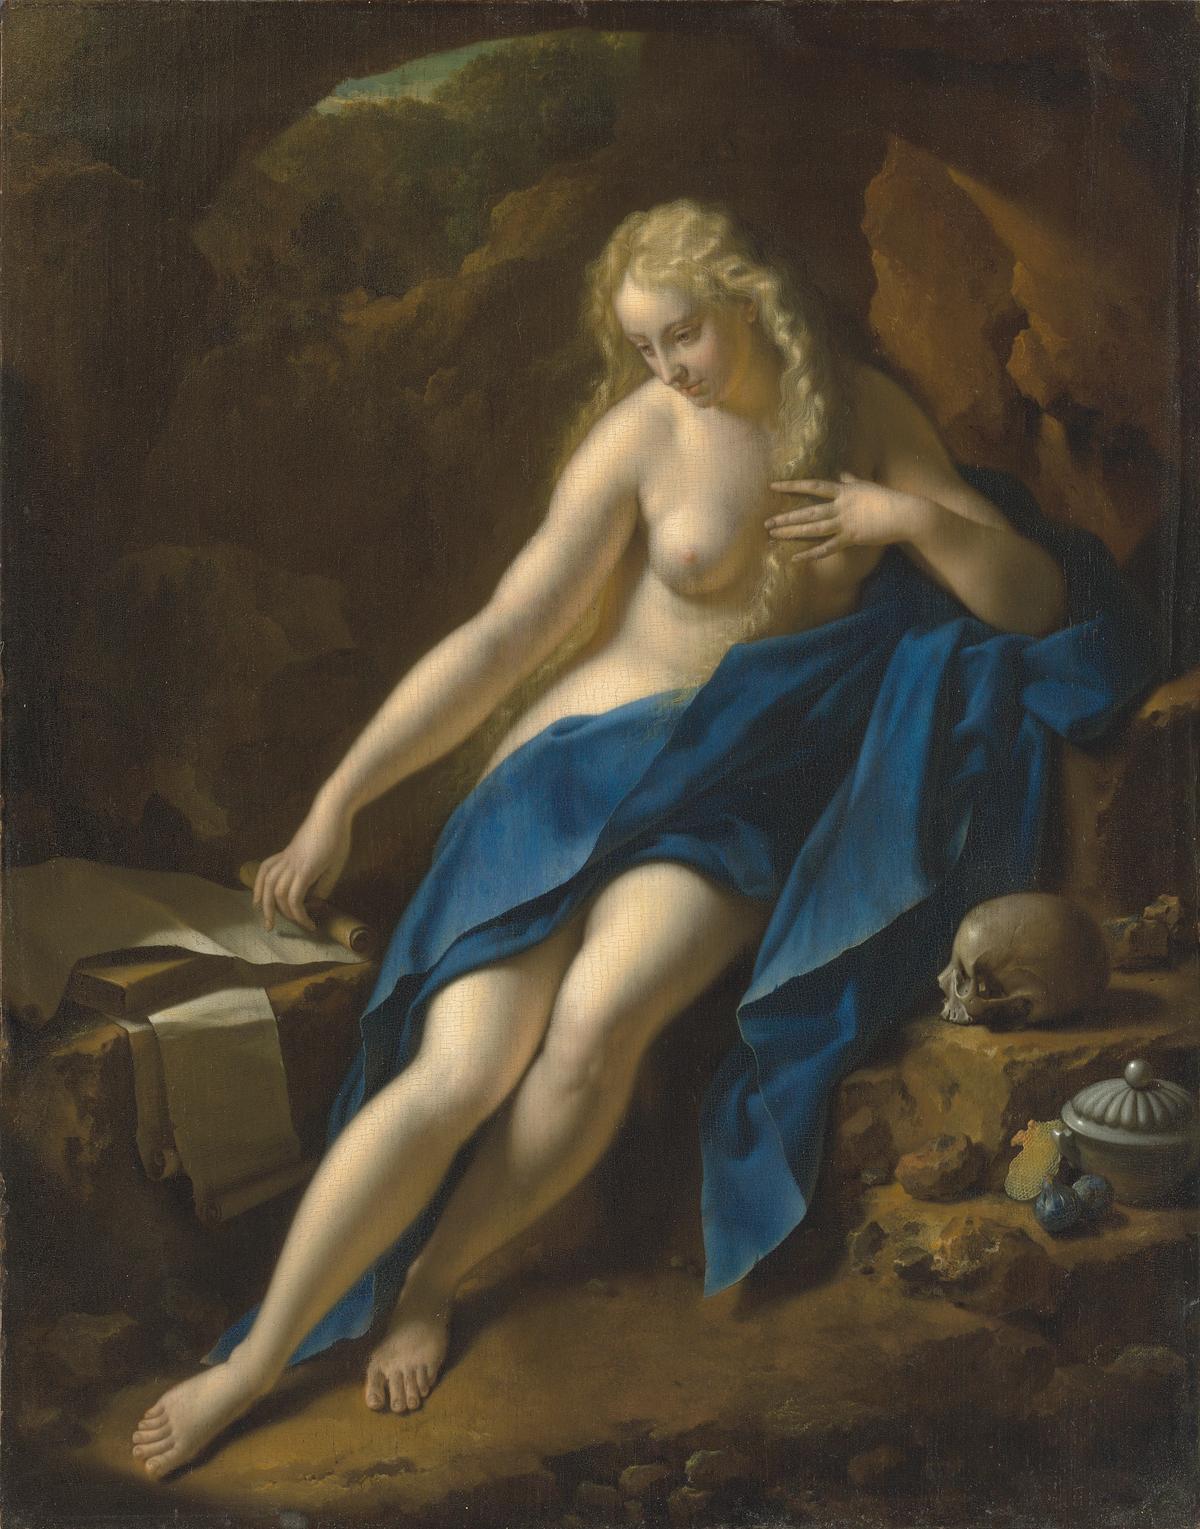 The Penitent Magdalene by Adriaen van der Werff was sold at Christie's in London in 2005 but appears in a French register of Nazi loot